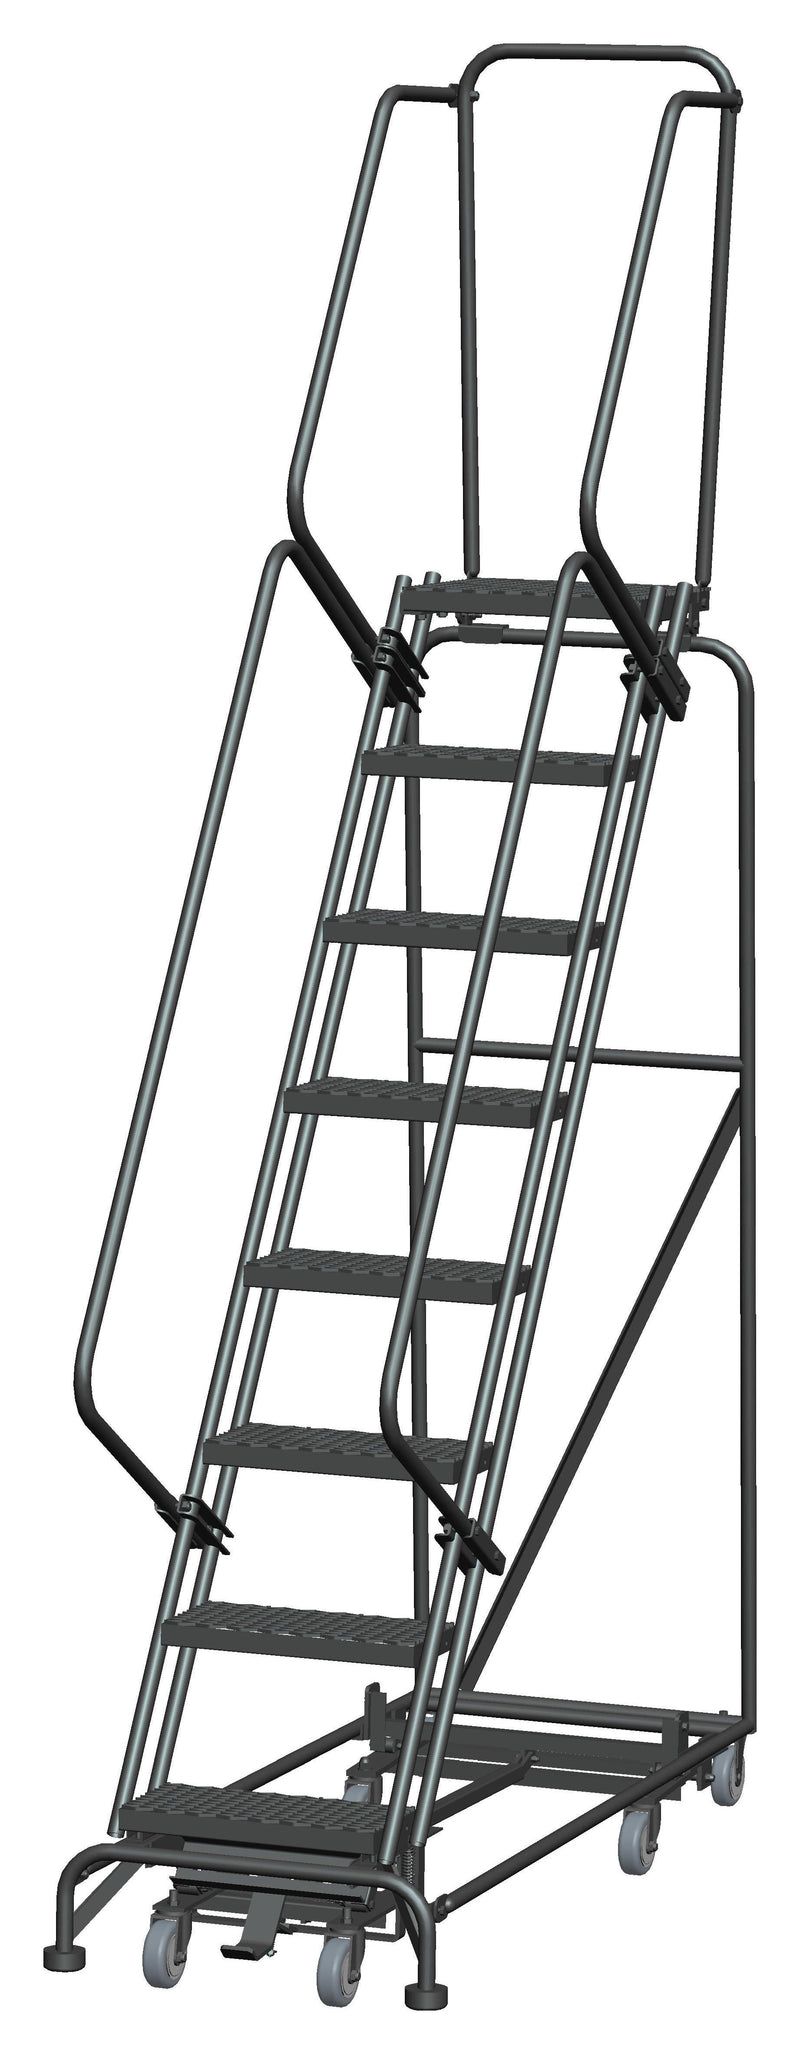 Rolling Ladder - Weight-Actuated, All Direction - 8 Step, Handrails - Ballymore